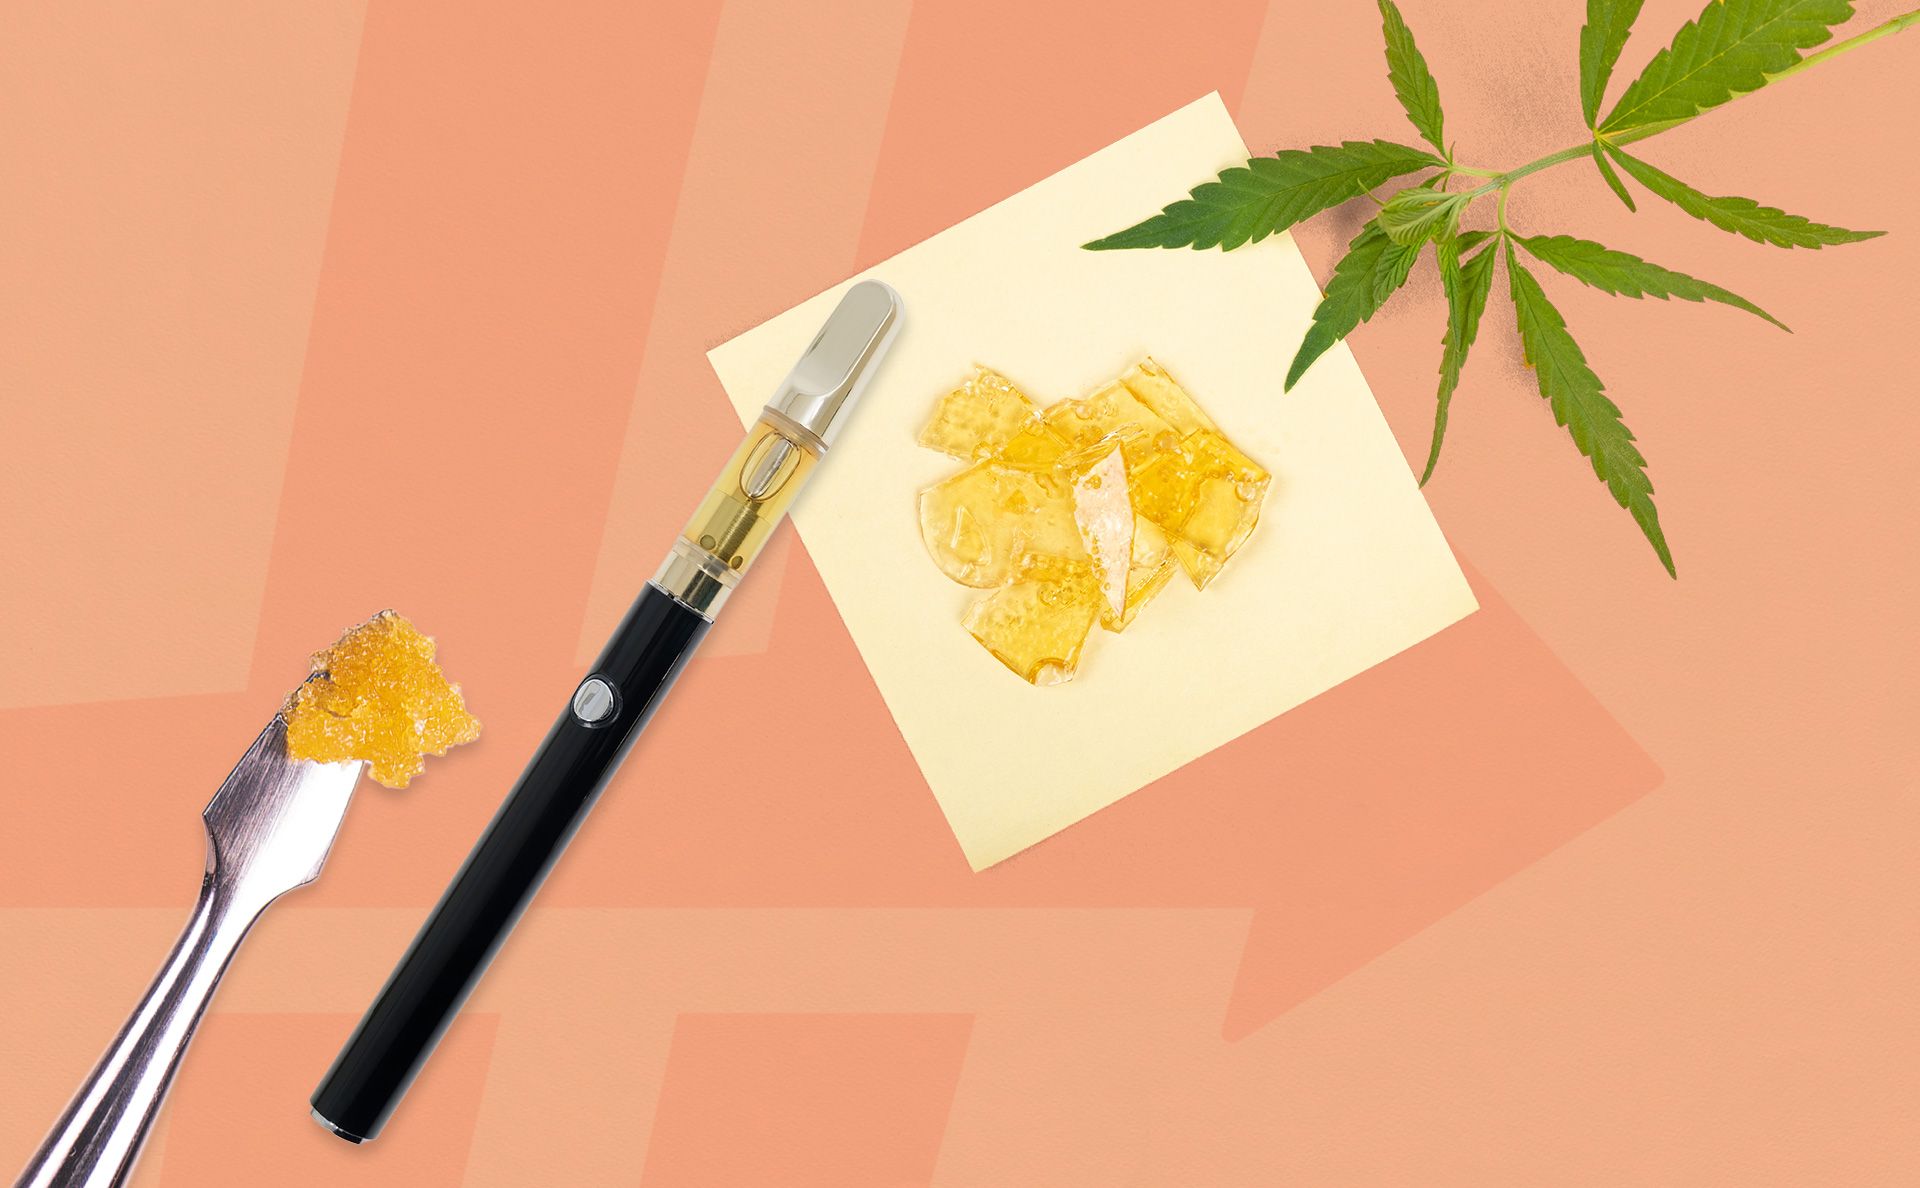 What Are Dabs?